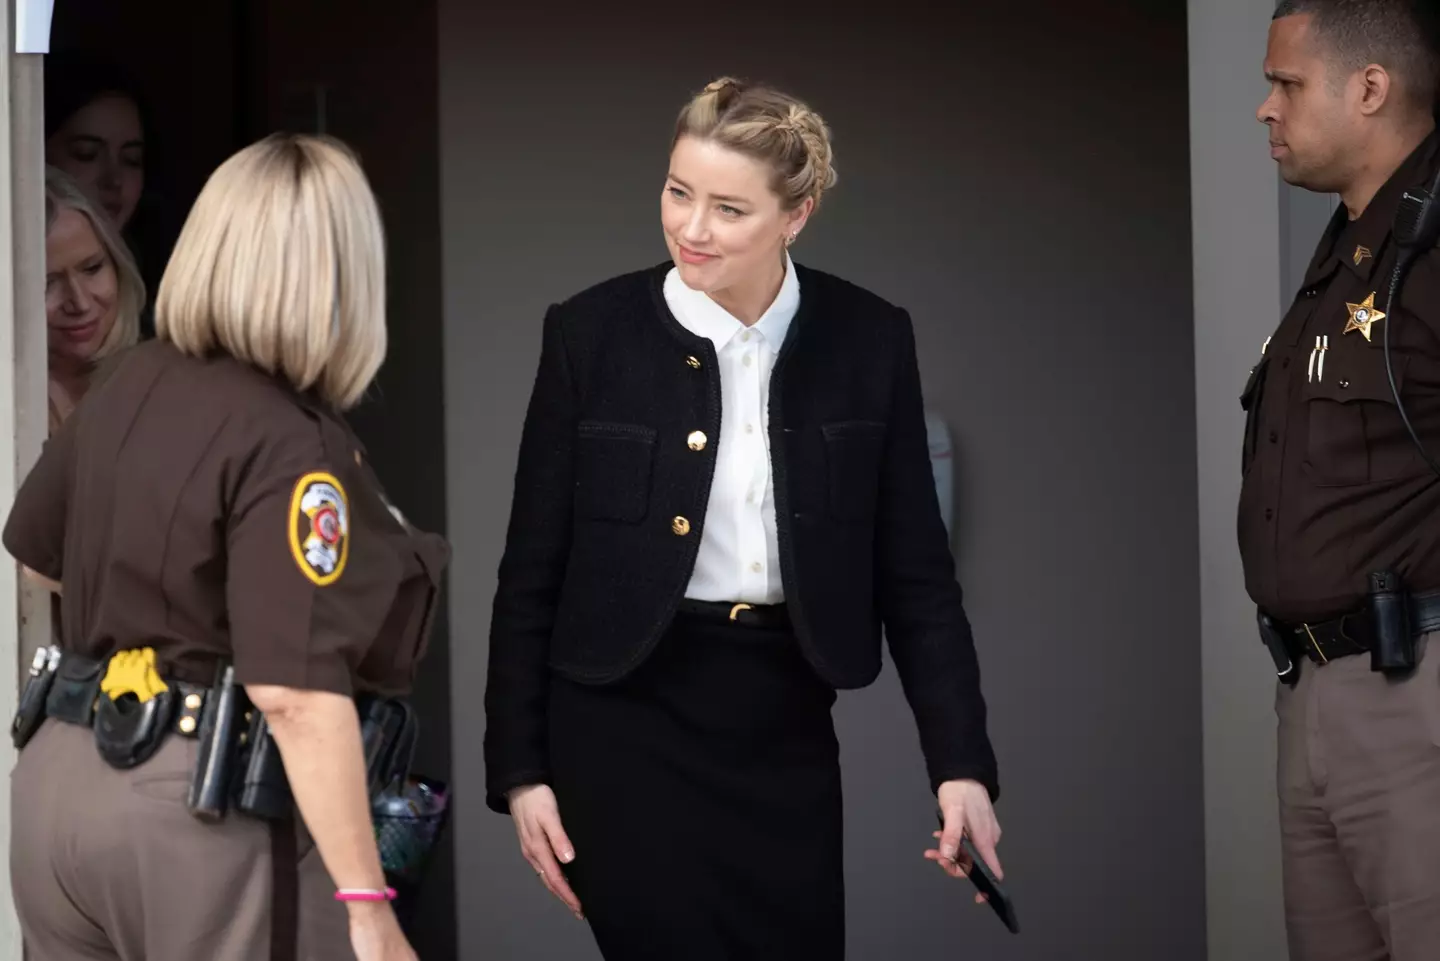 Amber Heard departs the Fairfax County Courthouse, in Fairfax, during the civil trial between her and Johnny Depp.